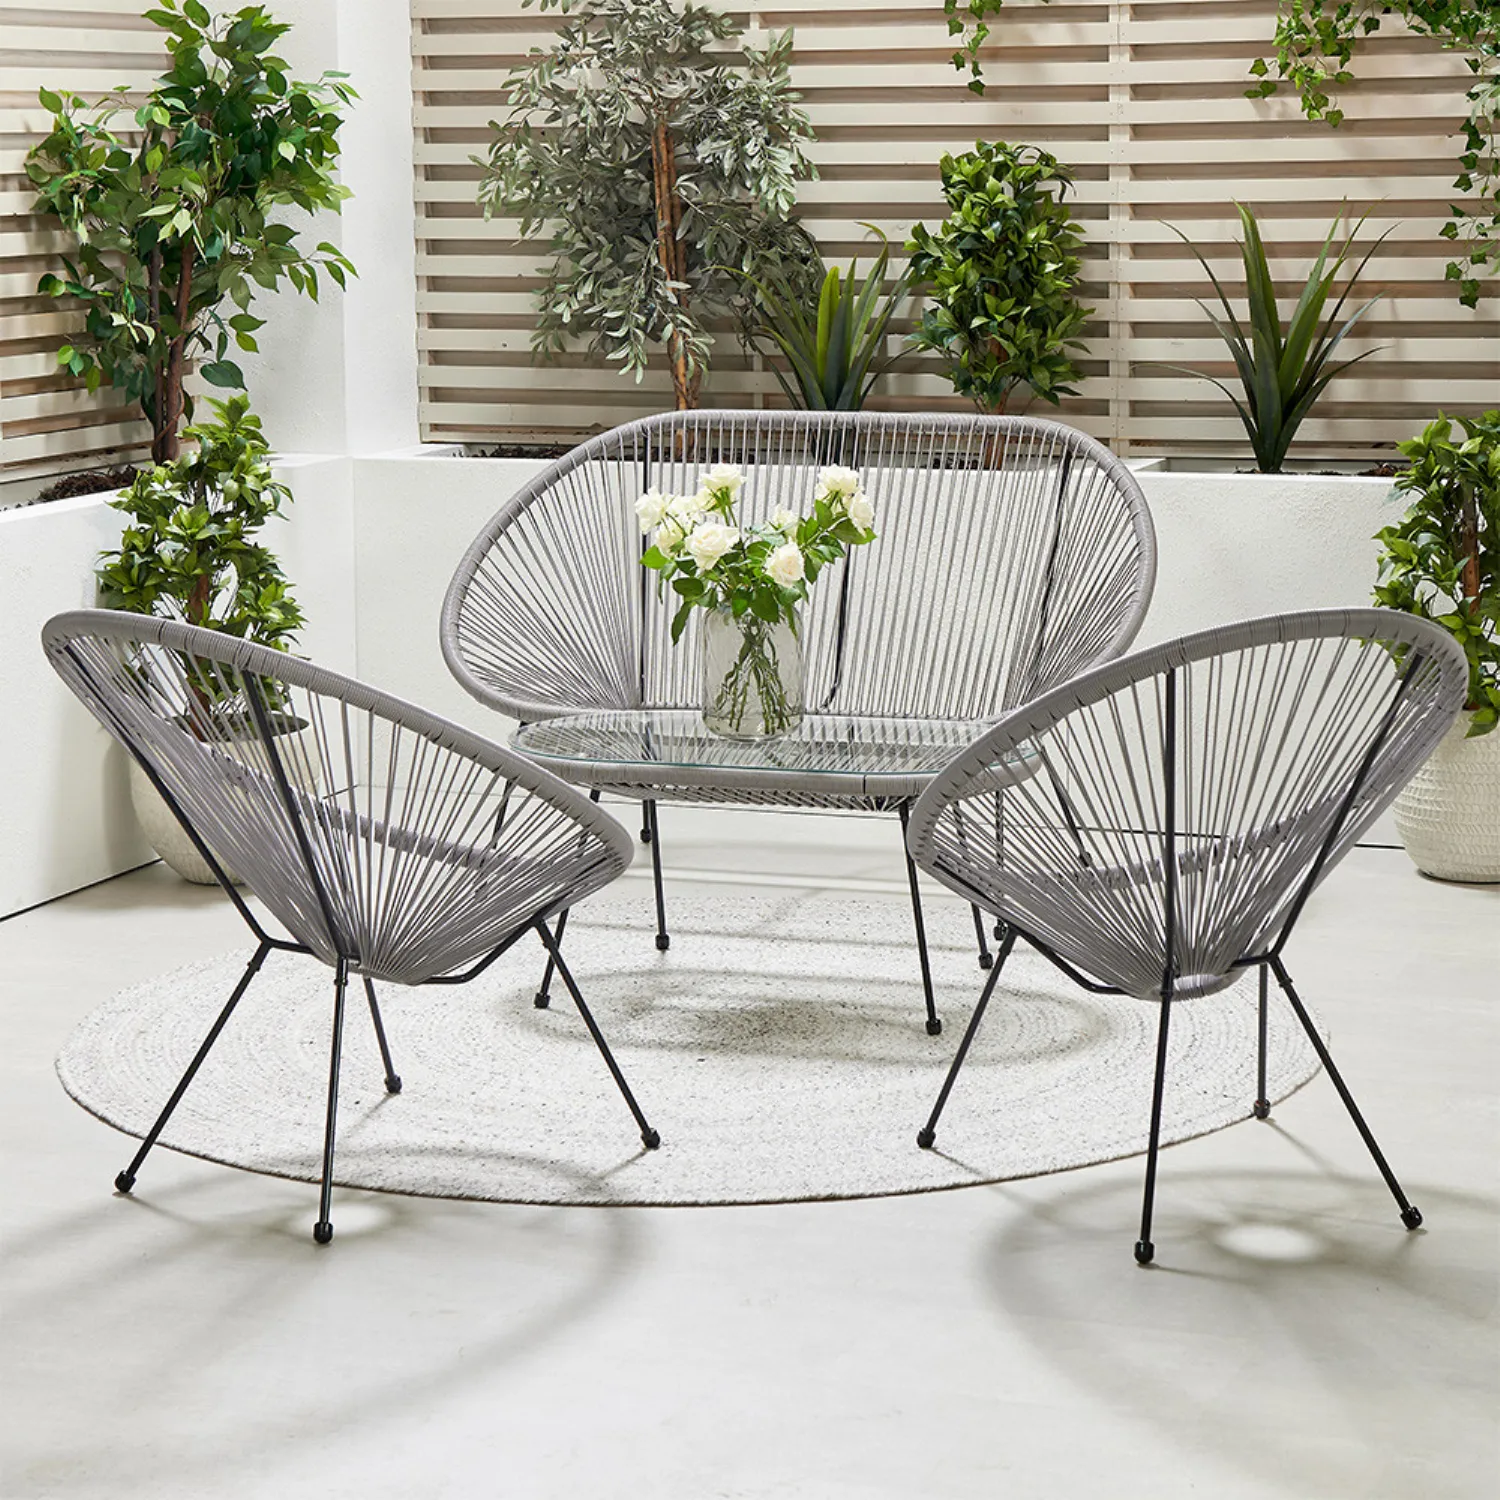 Grey Wicker 4 Piece Garden Seating Set with Coffee Table